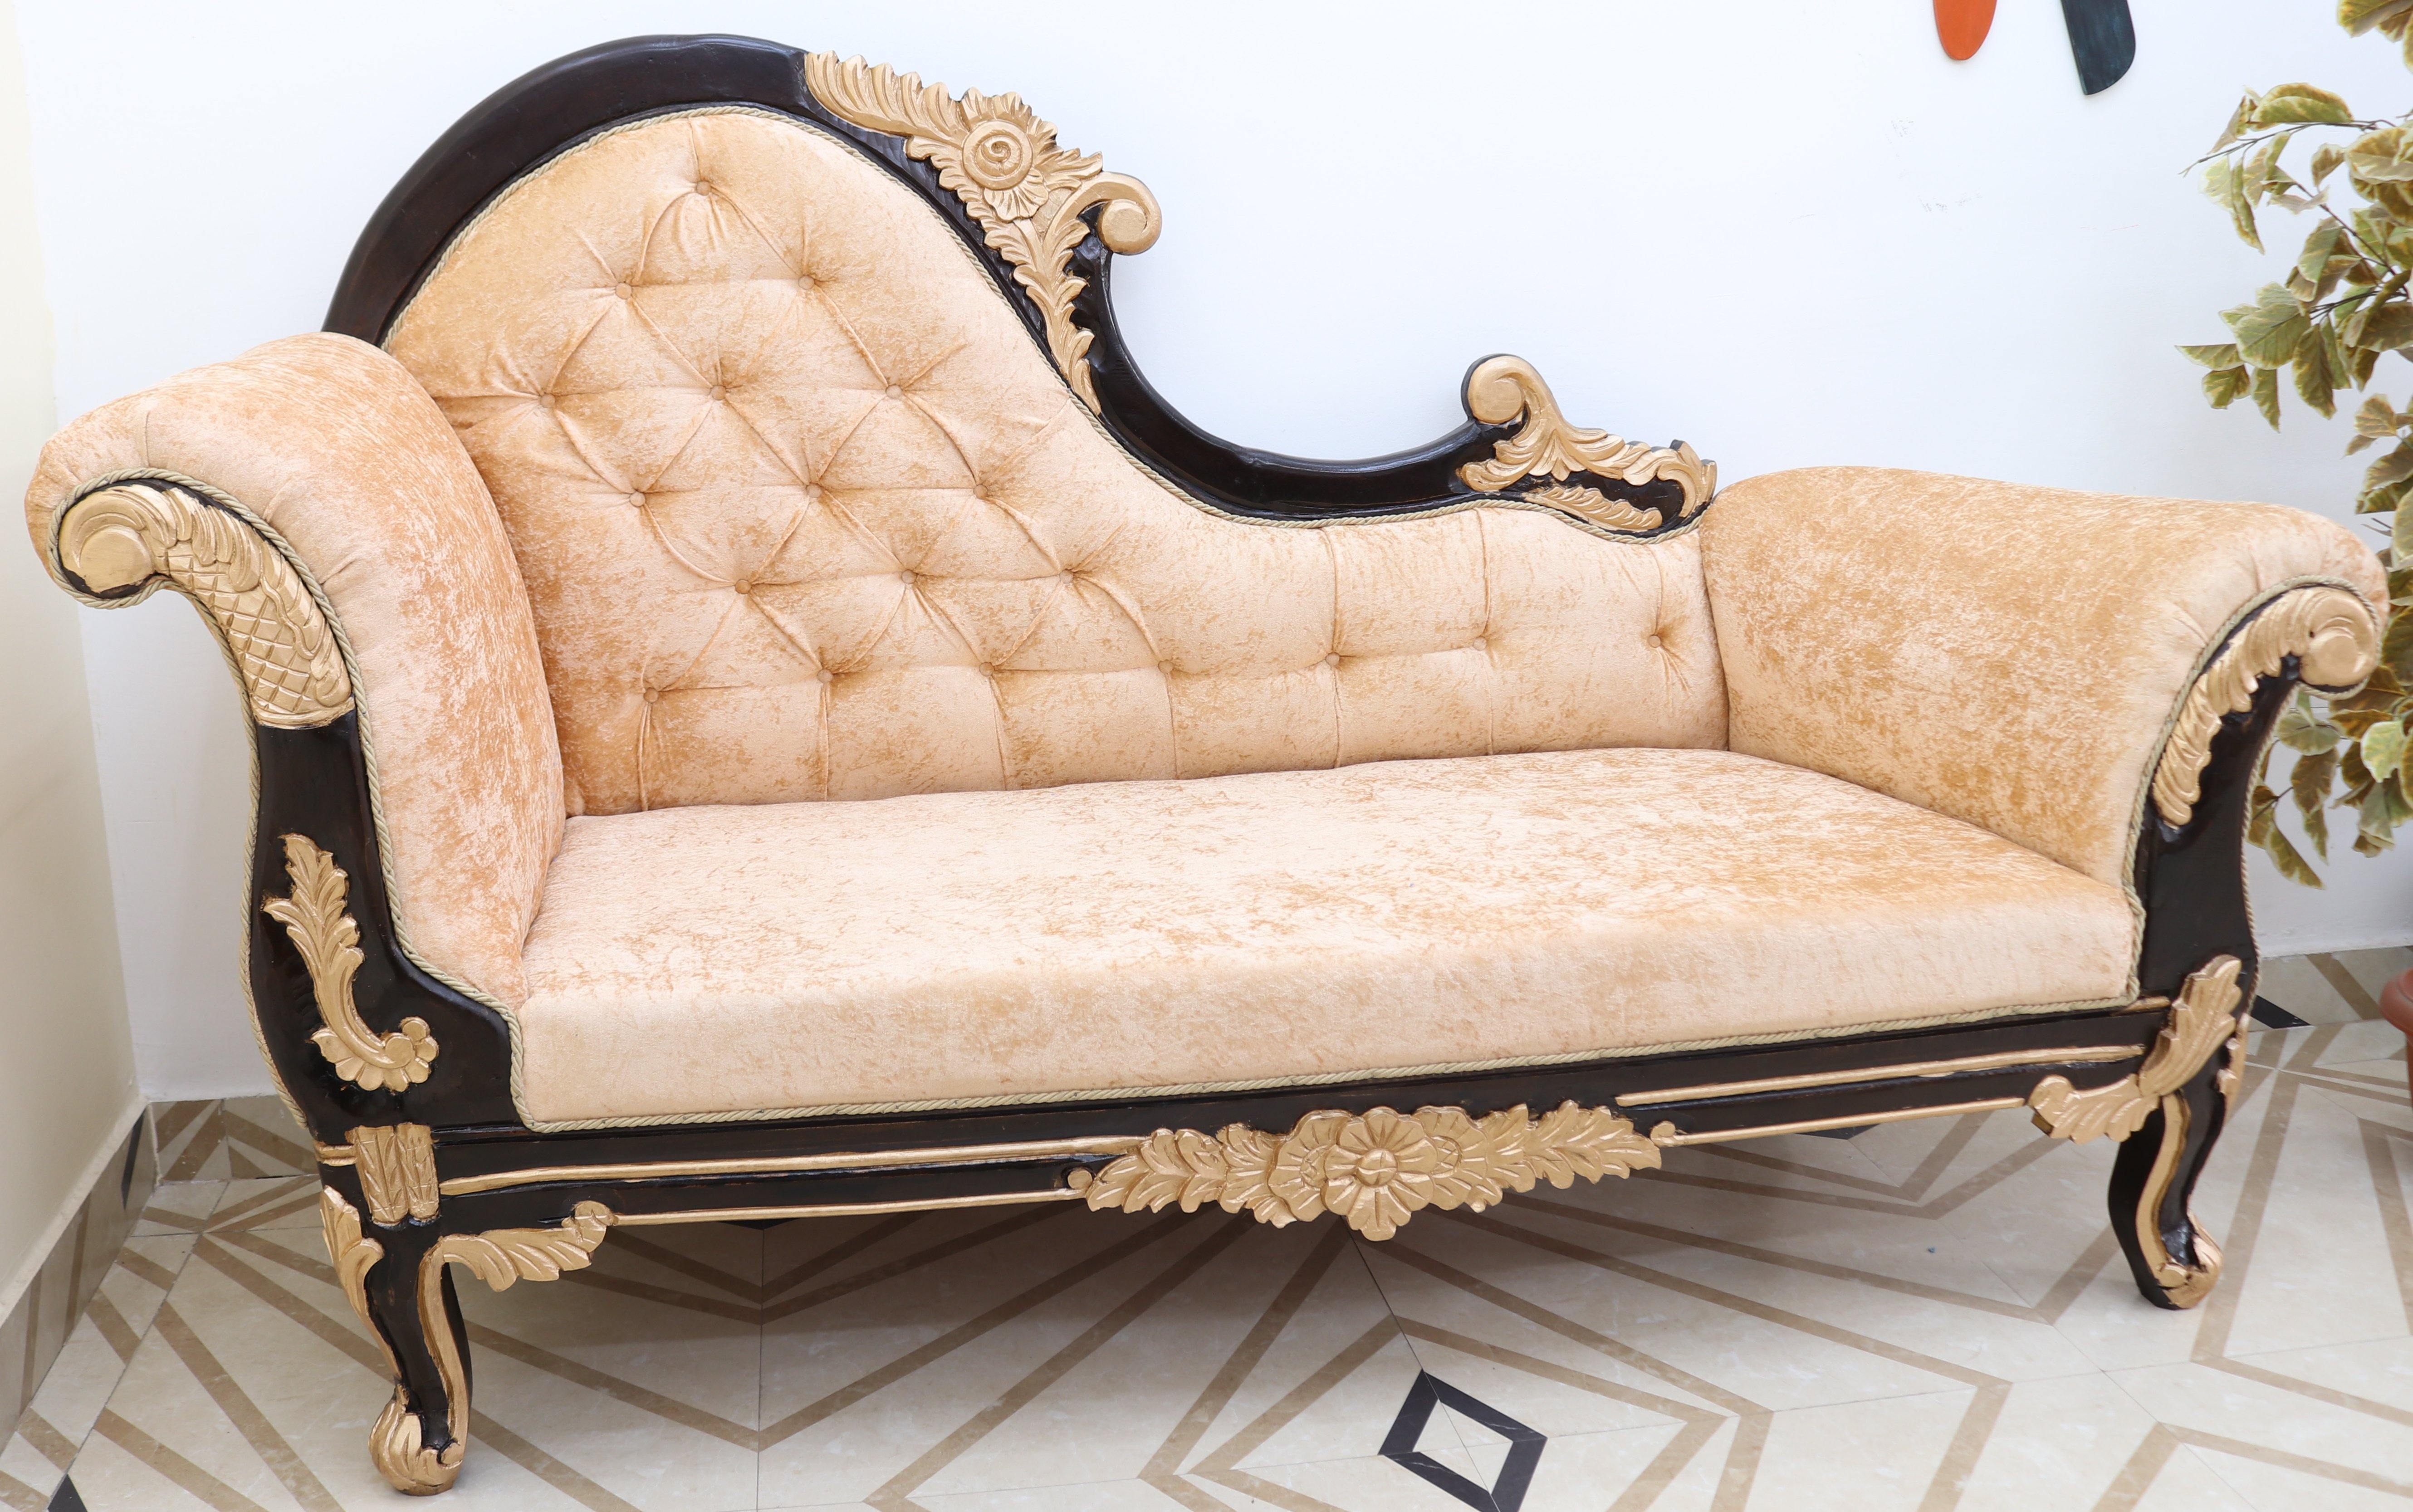 An Amazing Wooden Sofa Set Designs With 75 In India Get Quality Furniture S A Twist Woodentwist